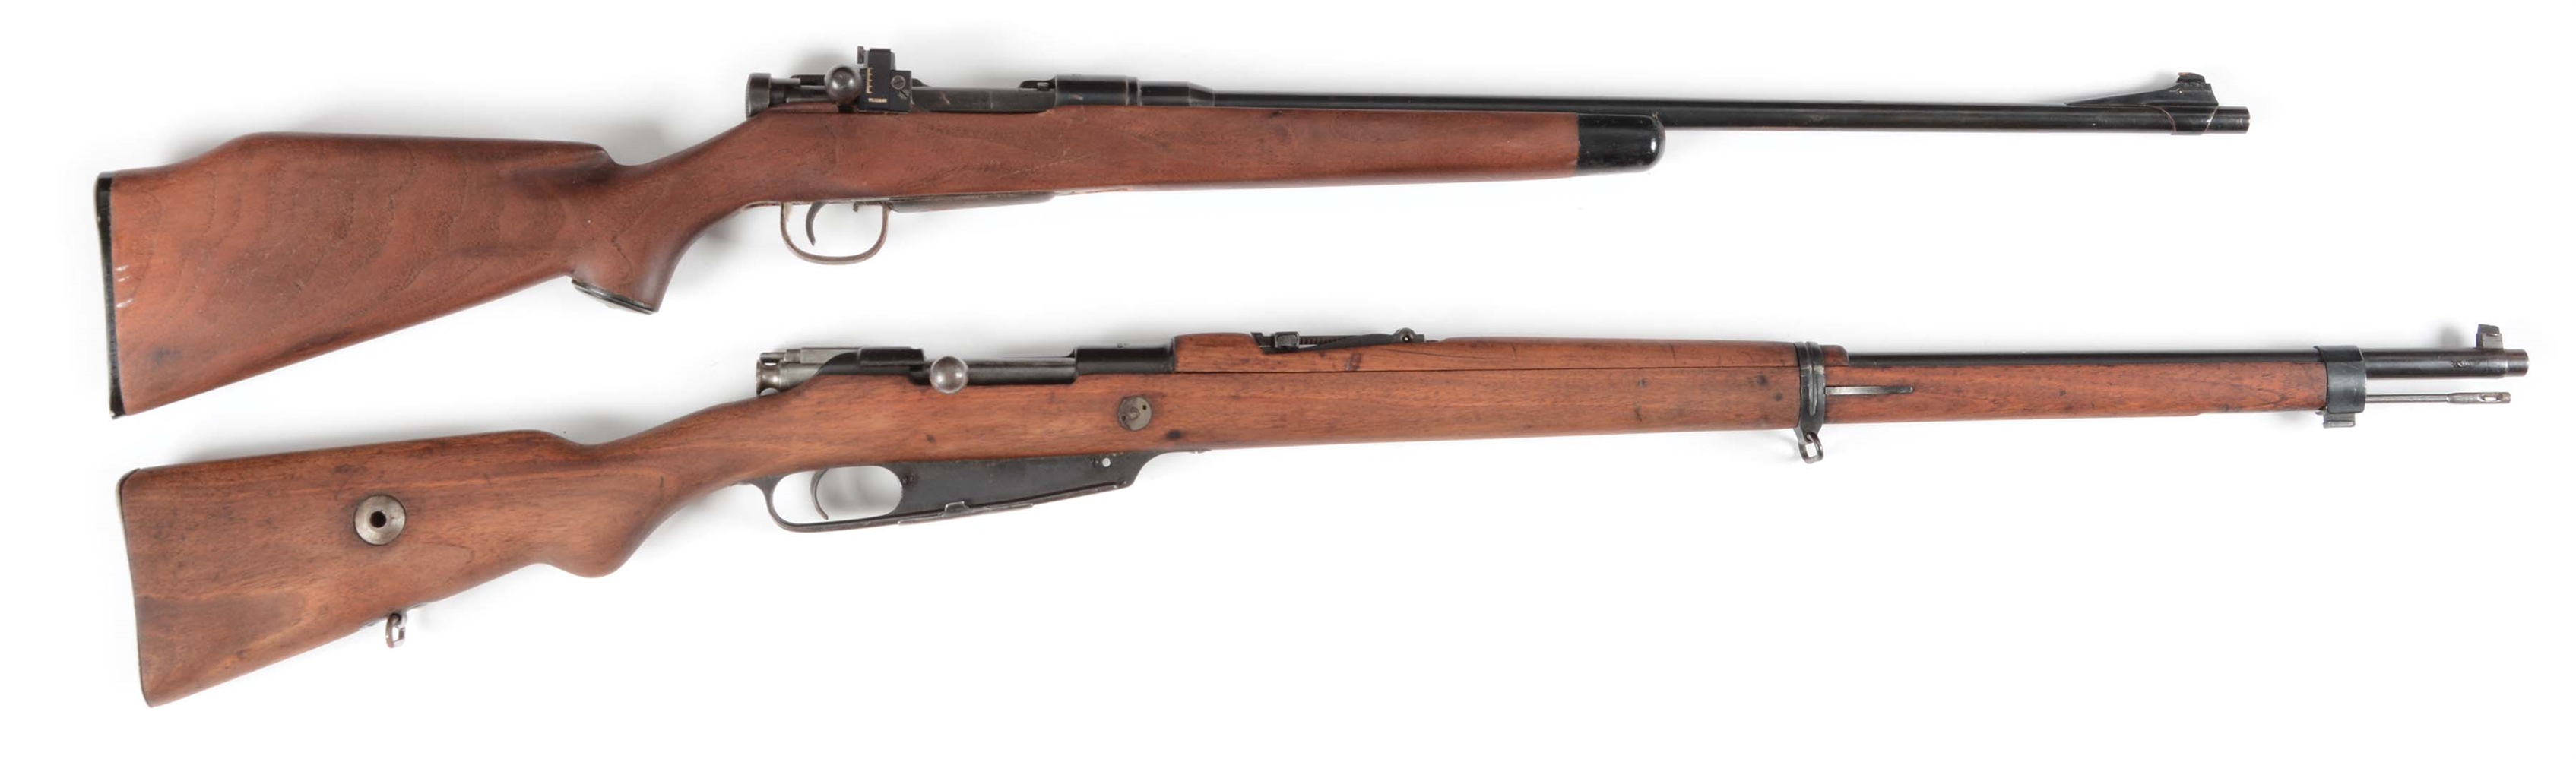 (C) LOT OF 2: MILITARY BOLT ACTION RIFLES.